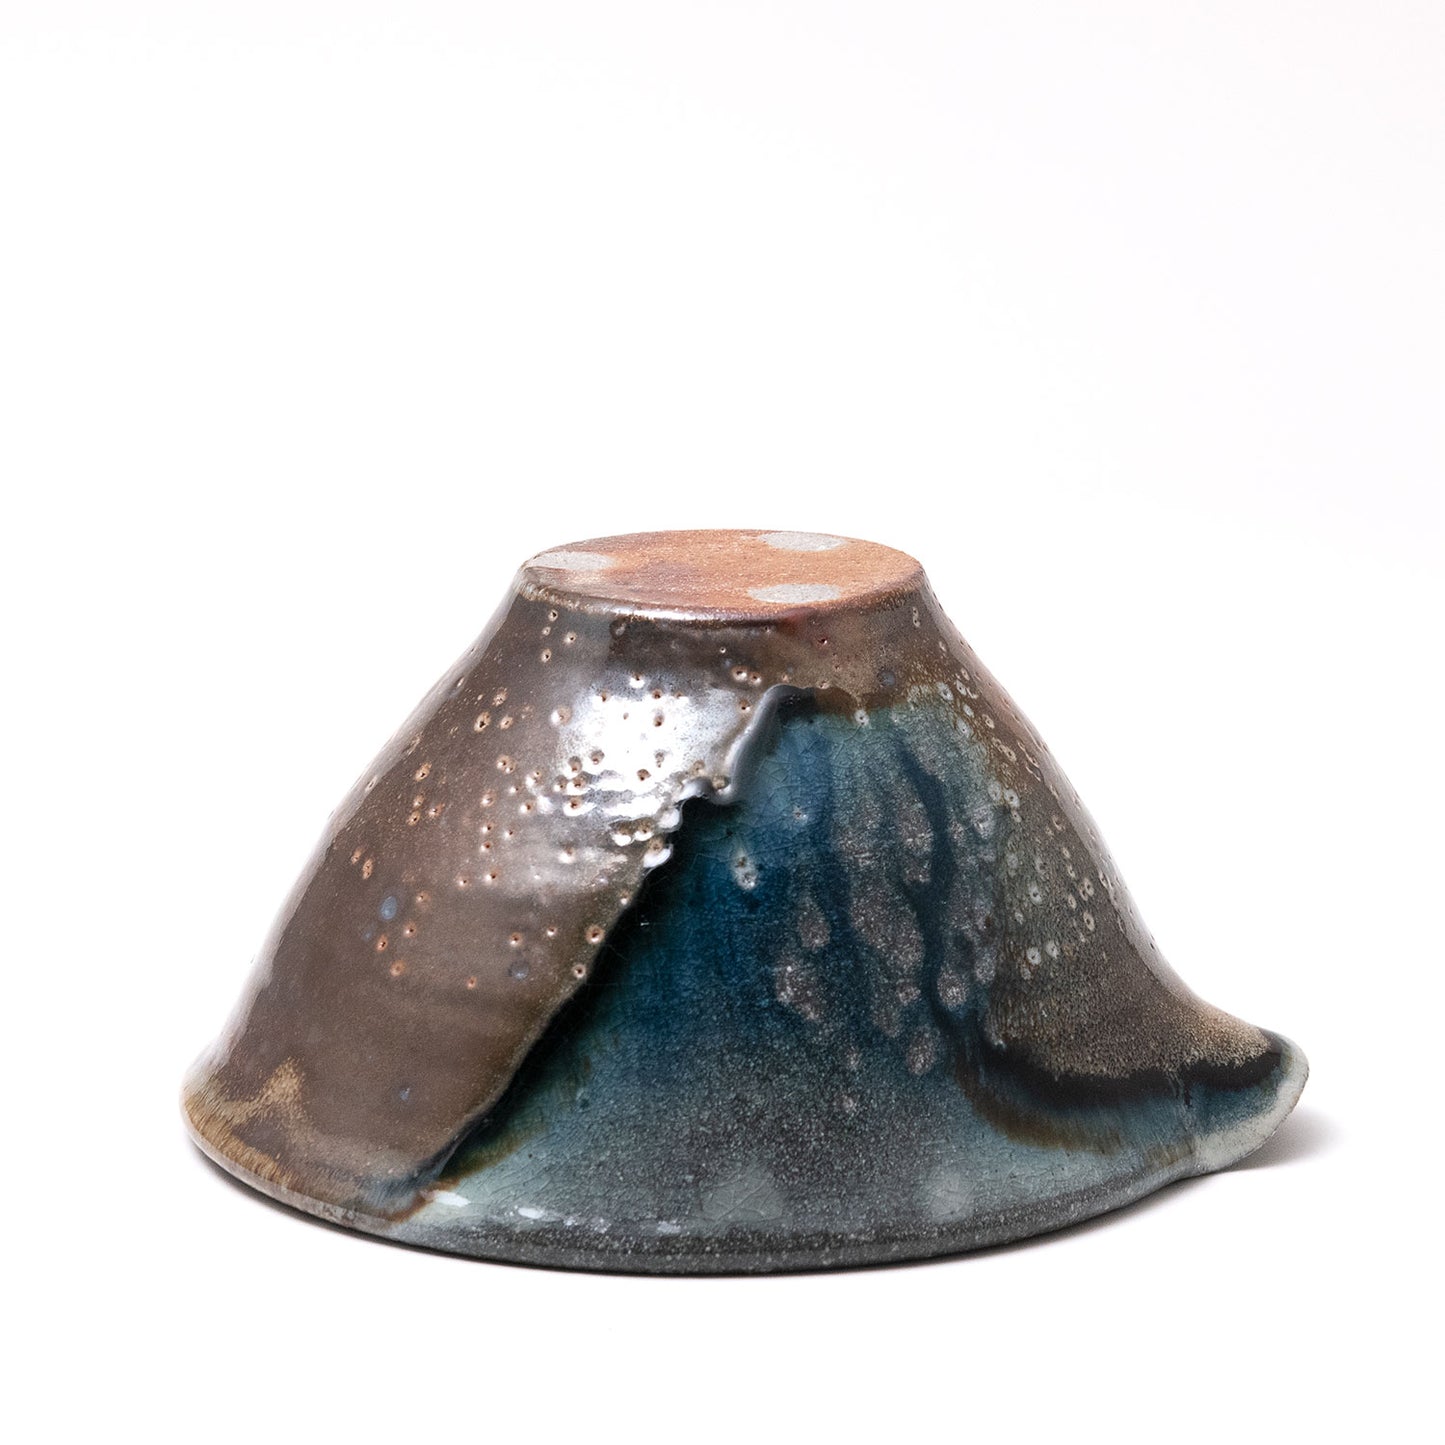 Pouring Bowl